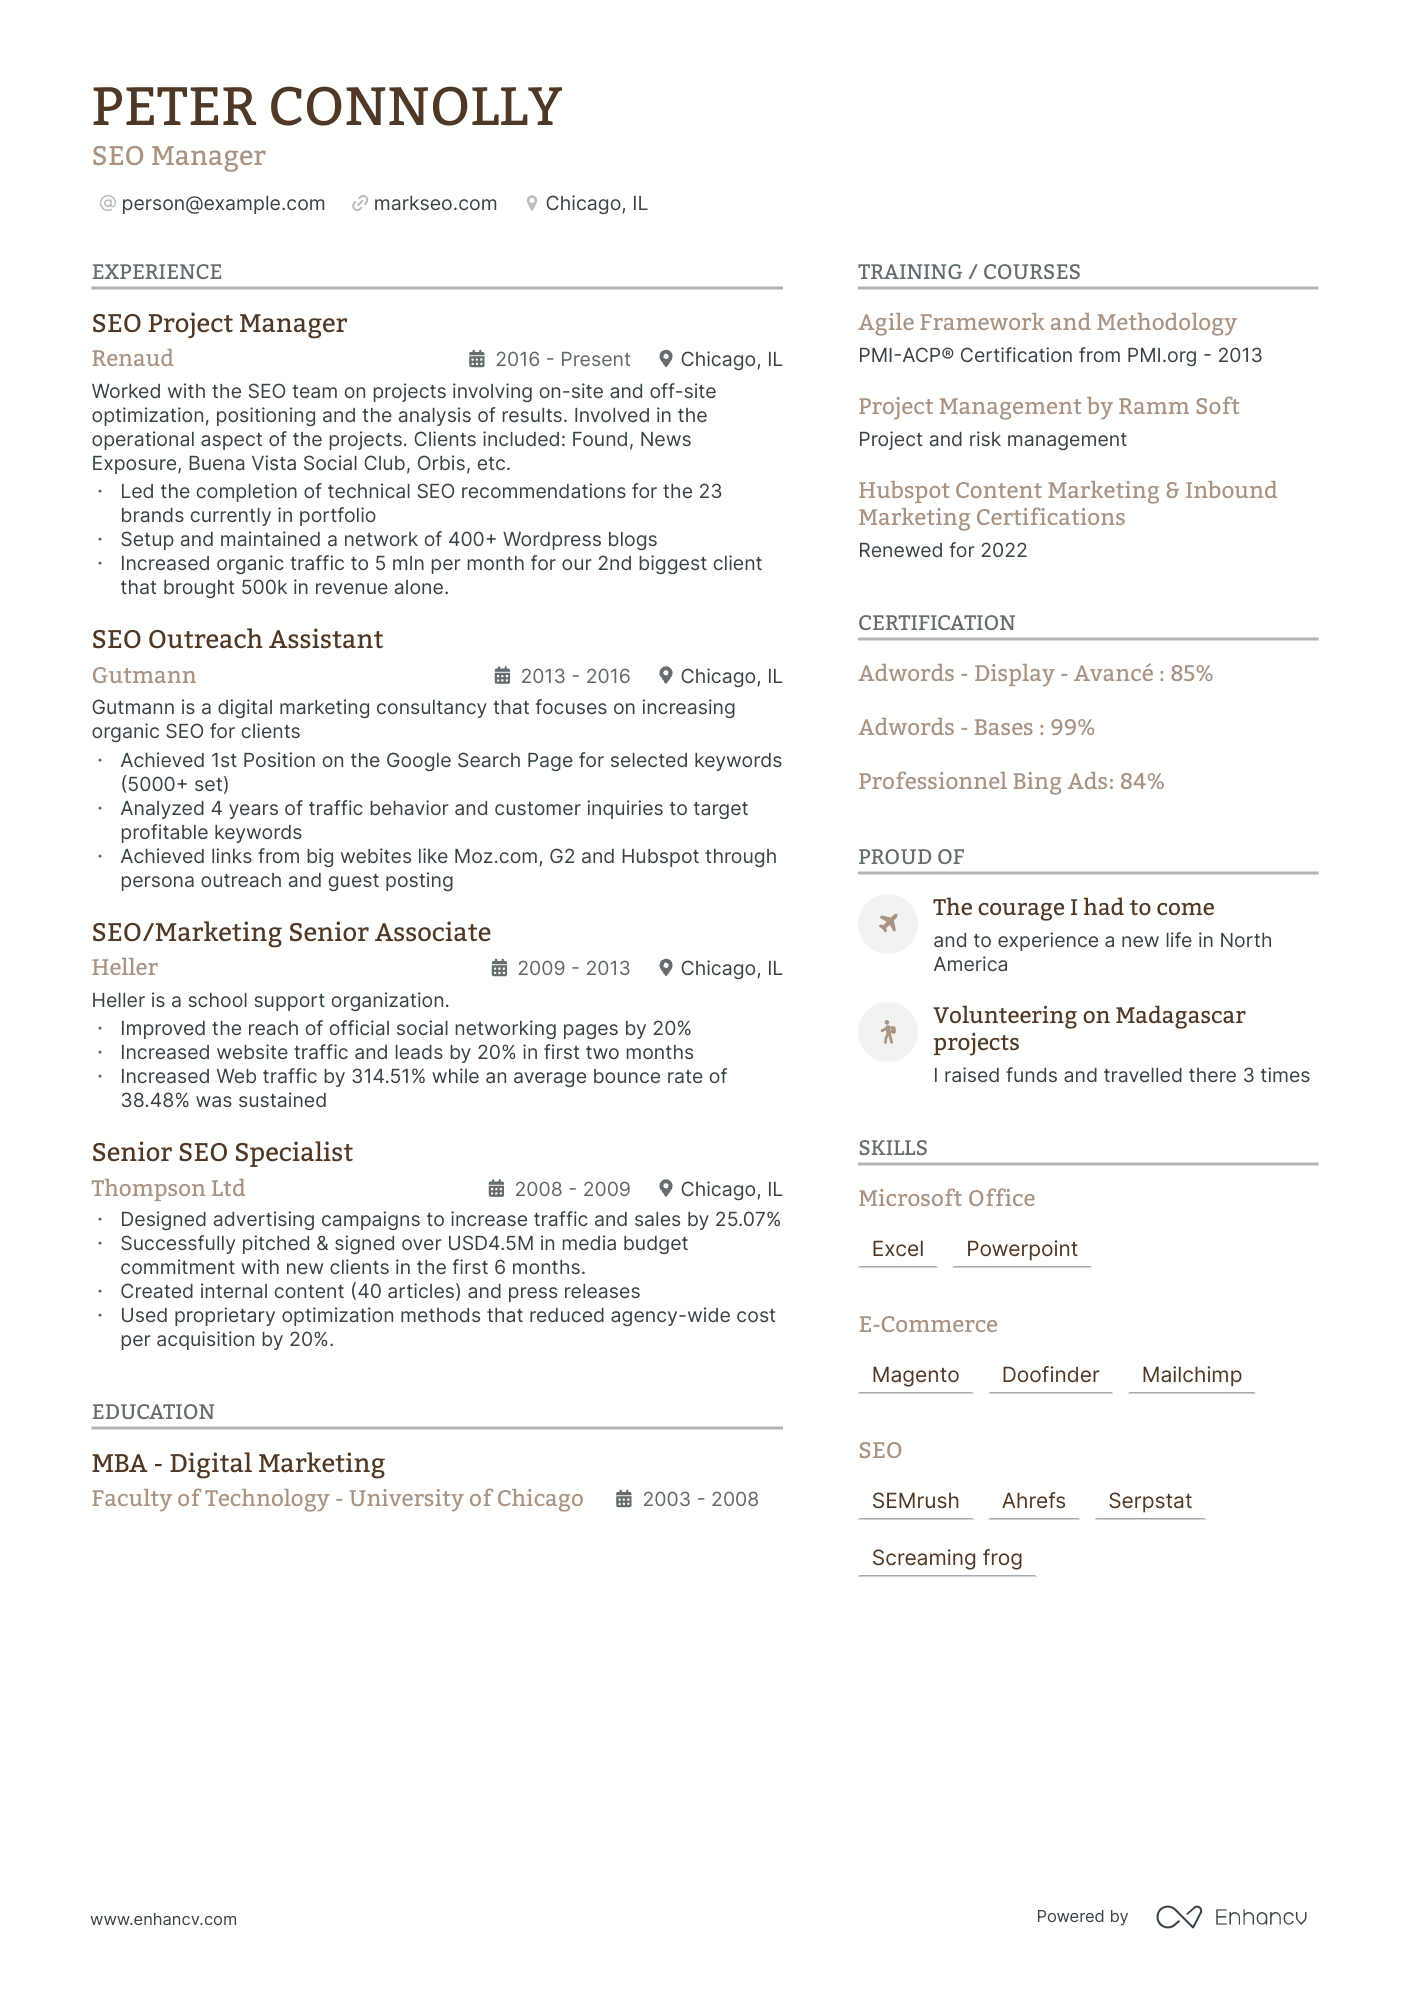 SEO Manager resume example